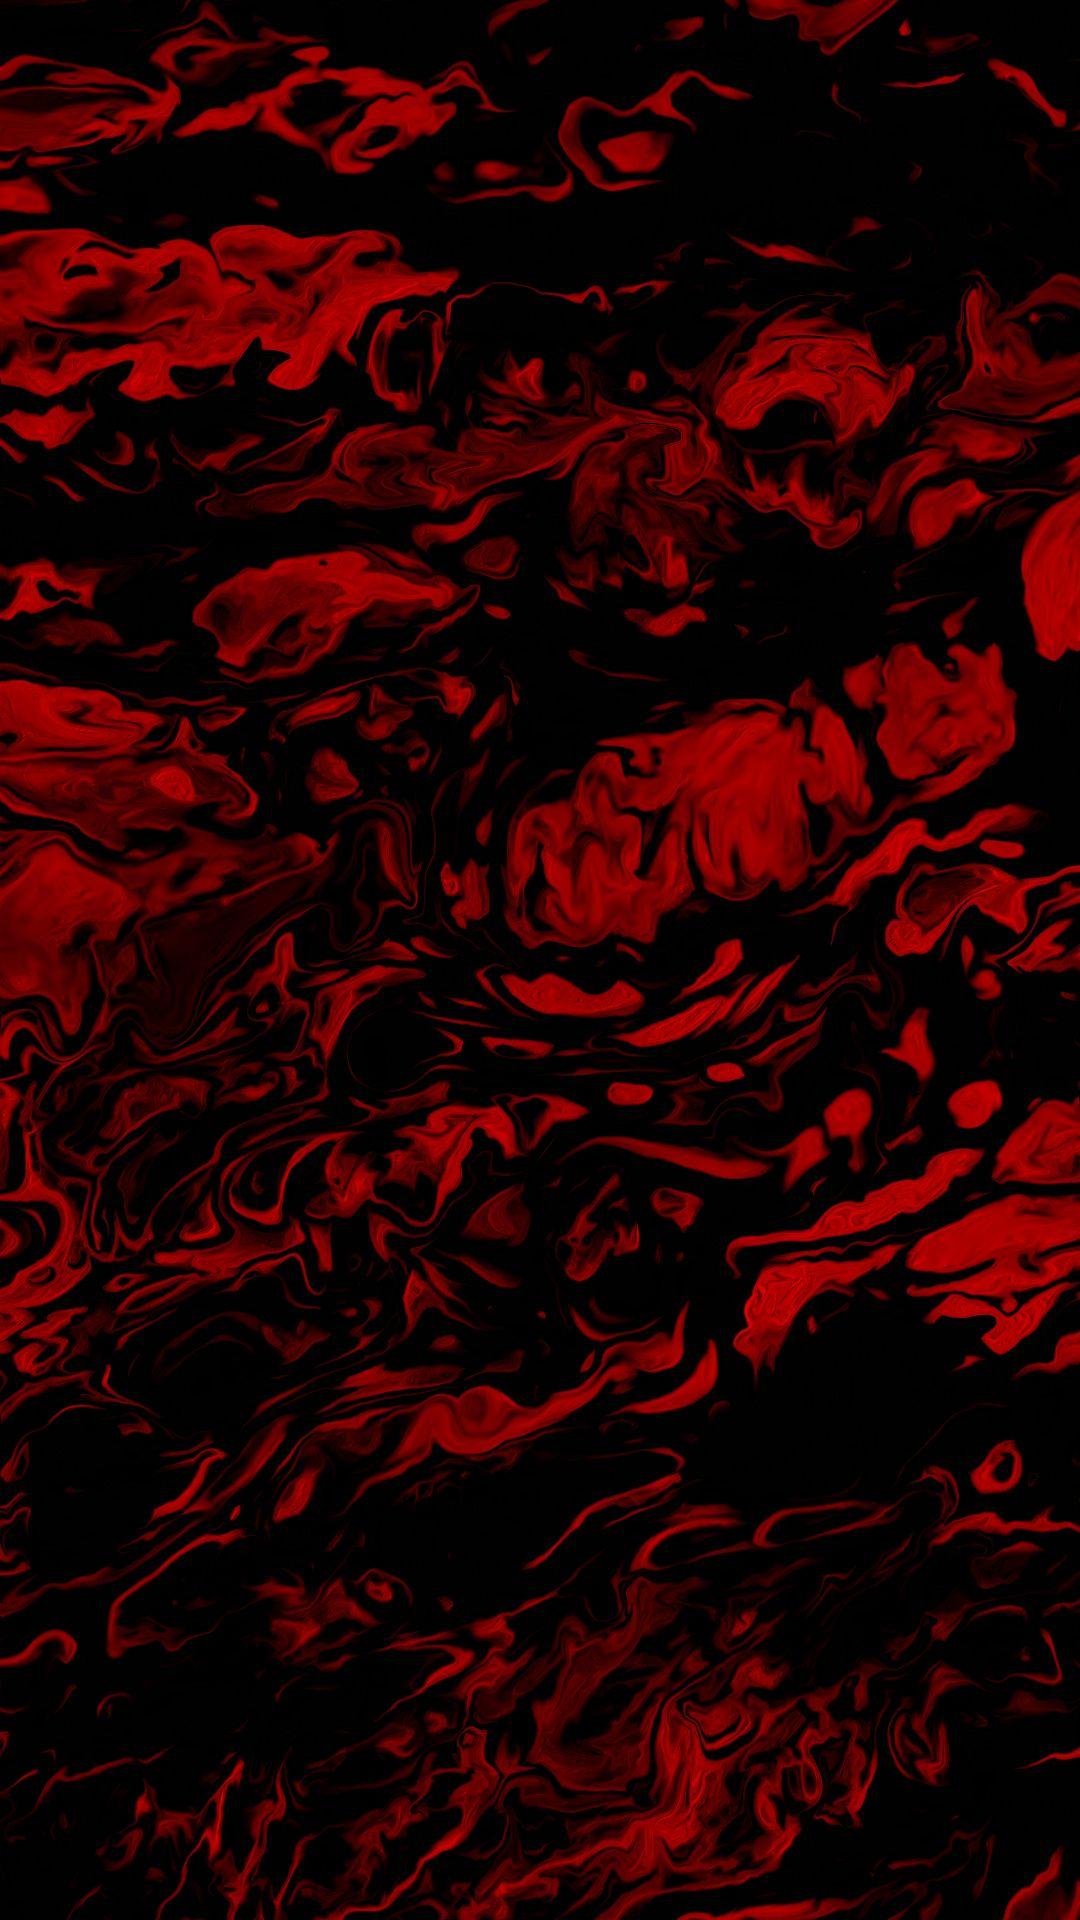 Red liquid abstract art. in 2020